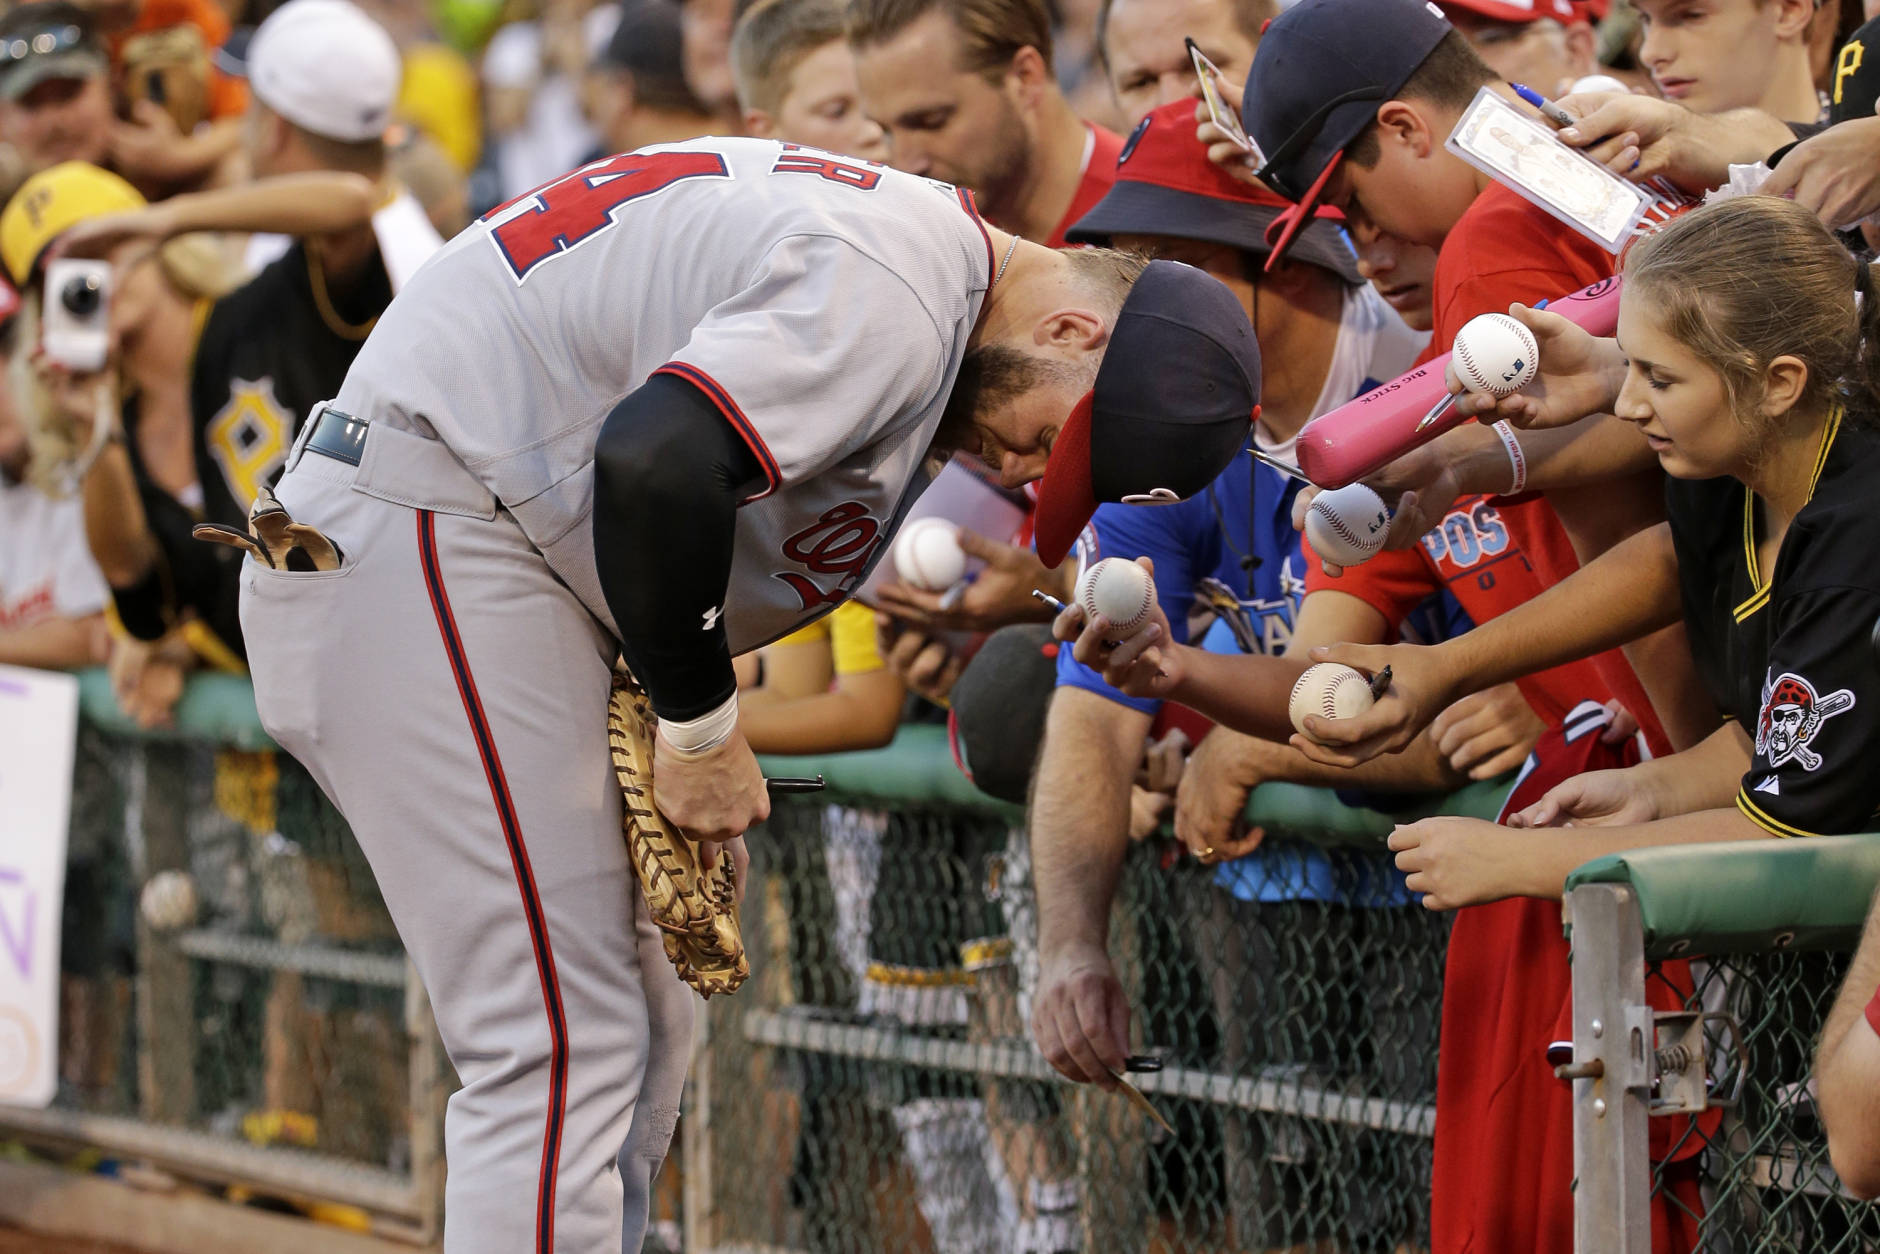 Washington Nationals' Bryce Harper signs autographs before a baseball game against the Pittsburgh Pirates in Pittsburgh, Friday, Sept. 23, 2016. (AP Photo/Gene J. Puskar)